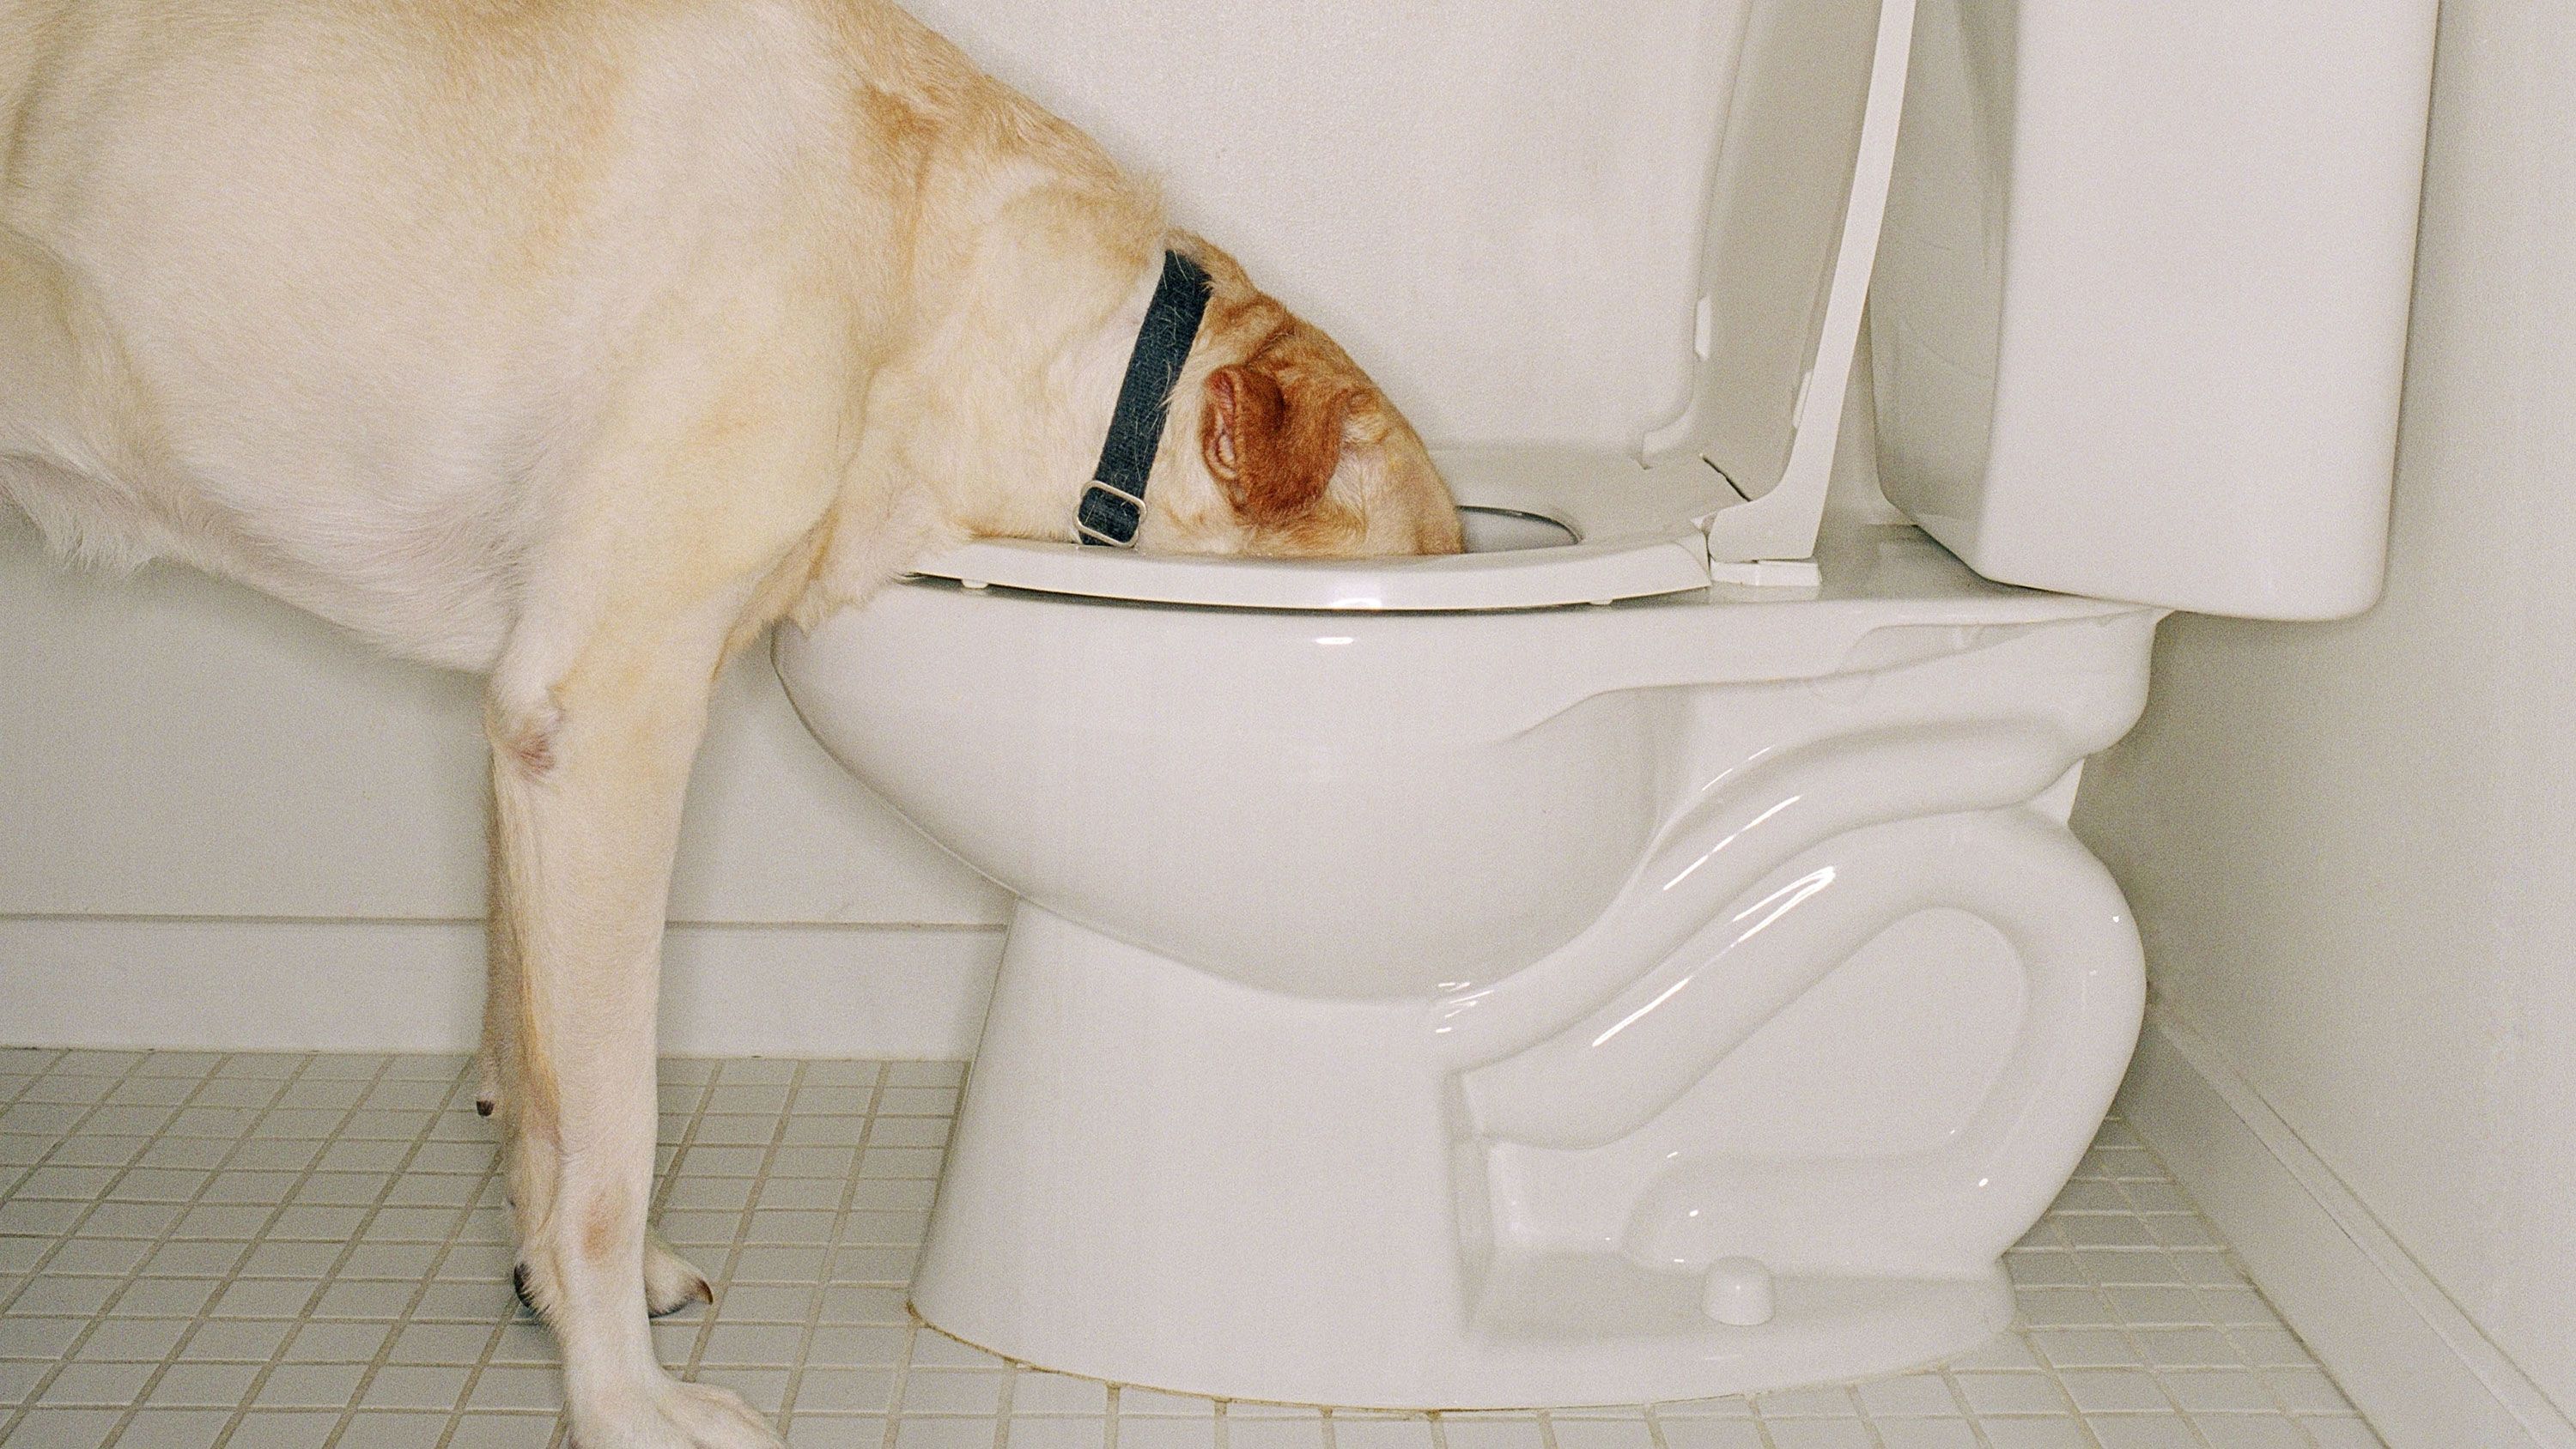 can toilet bowl cleaner kill a dog